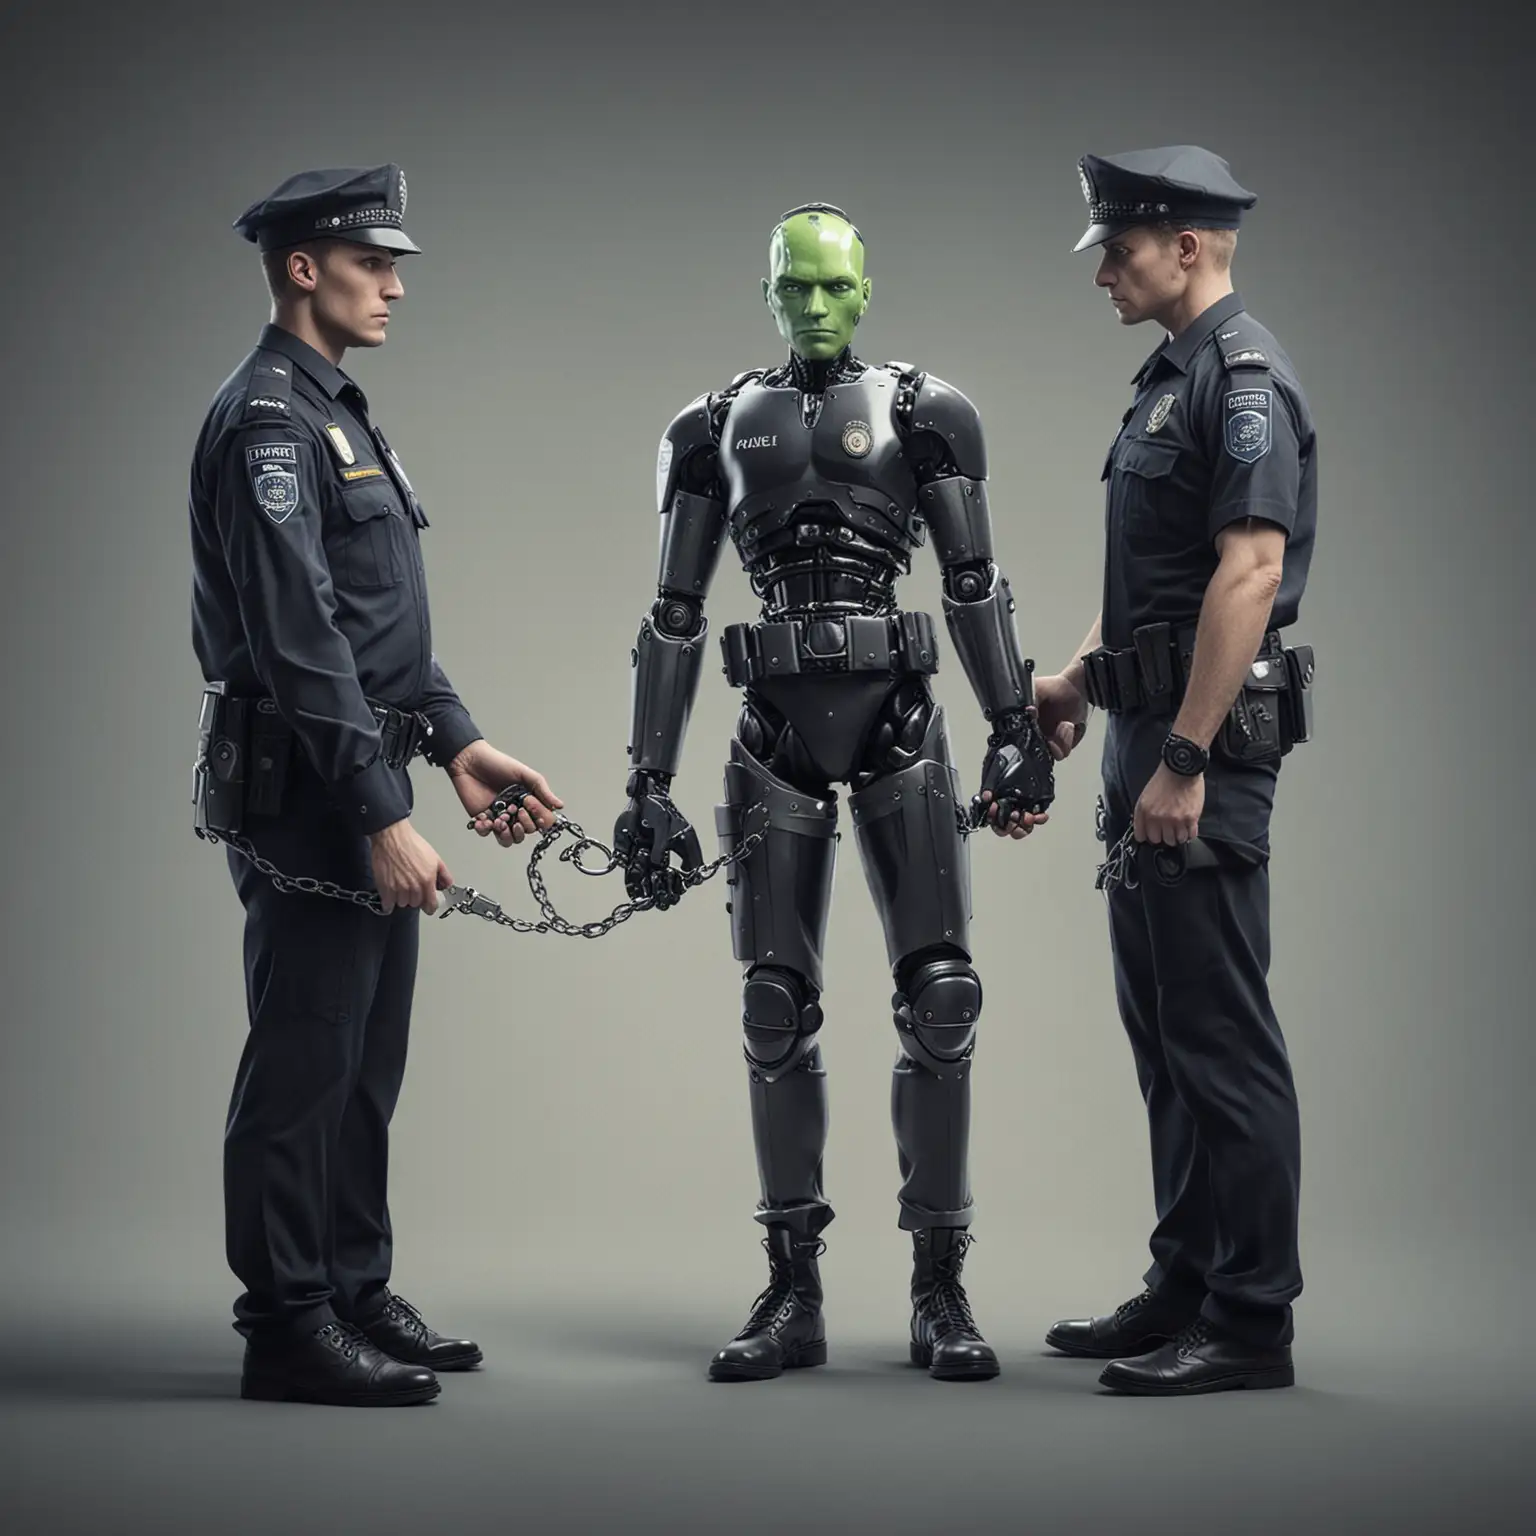 Android human put in handcuffs by a 
Police officer